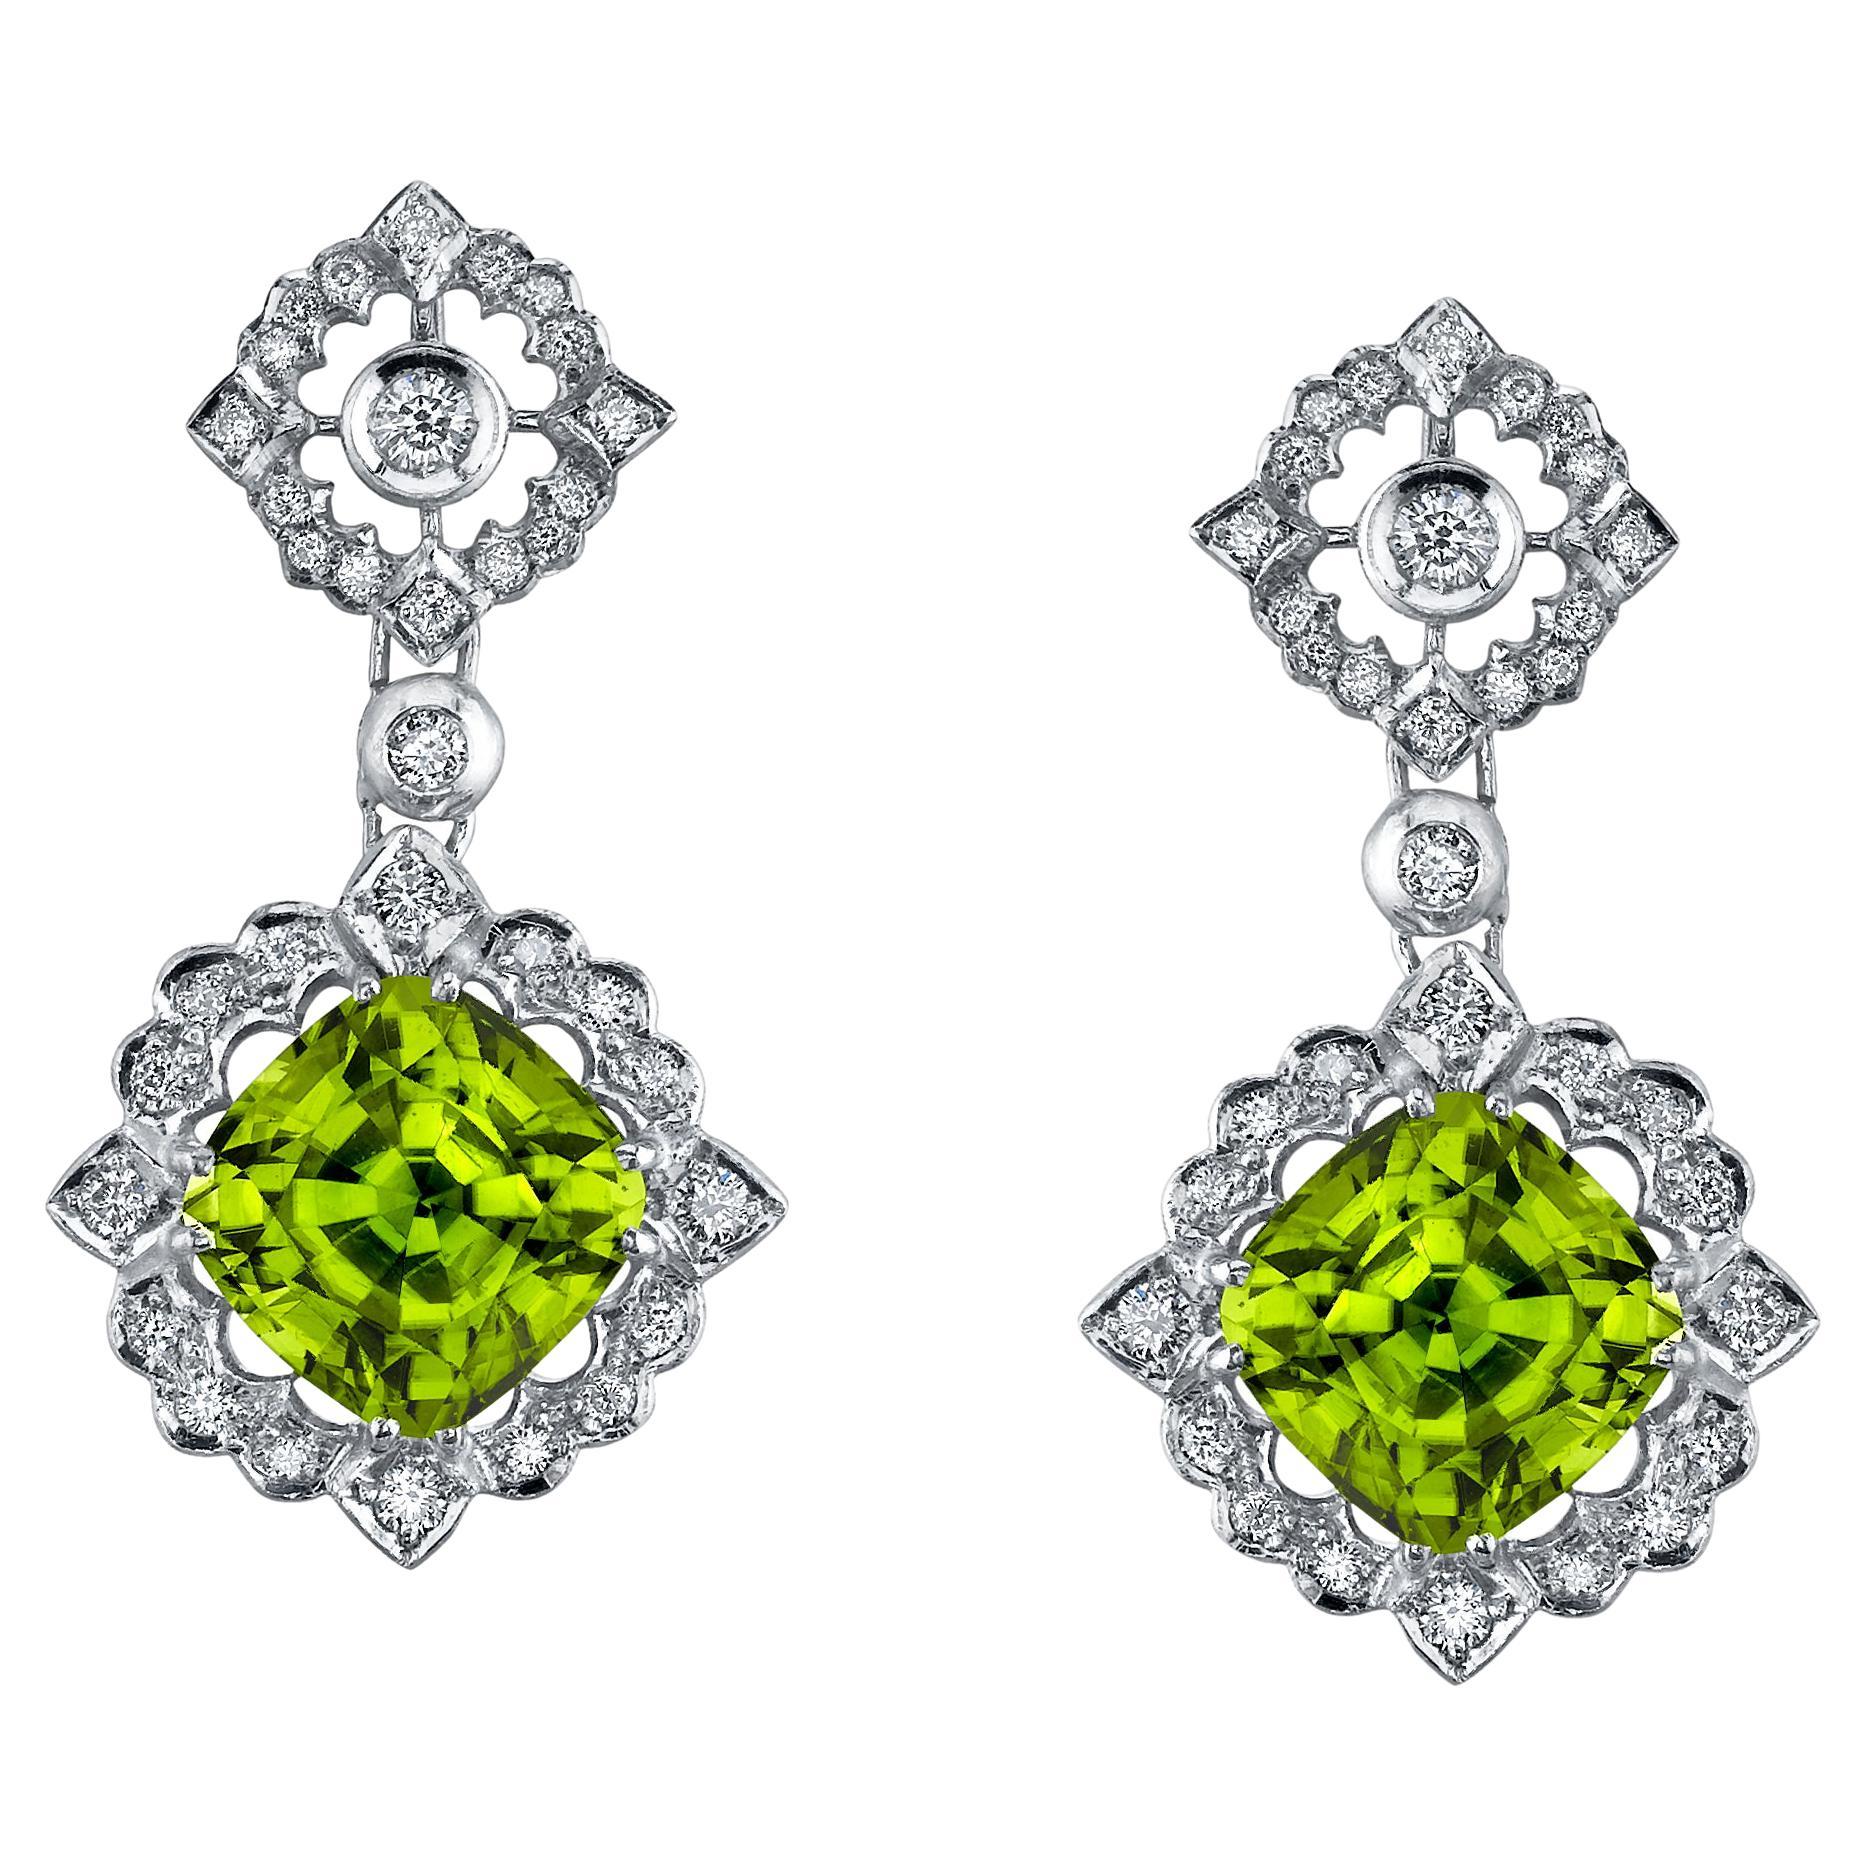 Remarkable pair of Peridots weighing a total of 12.89 carats, adorned by a total of 1.00 carat diamonds, set in 18K white gold Florentine style earrings.
Total length: 1.5 inches.
Returns are accepted and paid by us within 7 days of